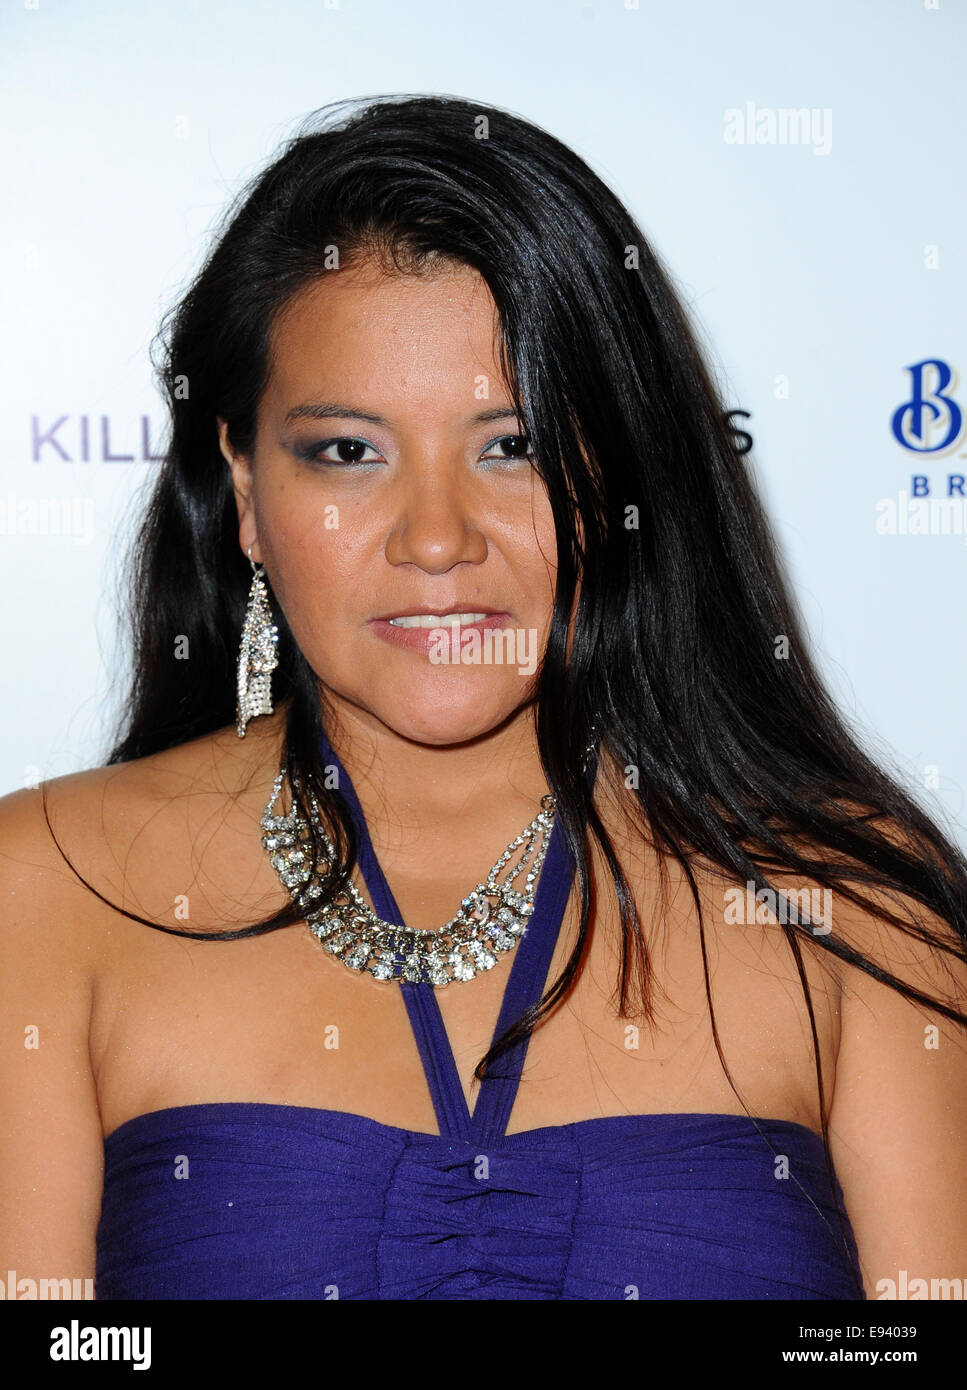 Oct 17, 2014 - File - Actress and Native American member of the Blackfoot Tribe MISTY UPHAM has died. On October 5, 2014, Upham left her sister's apartment on the Muckleshoot Reservation on foot and dissapperaed. Upham's body was discovered on Oct. 16th at the bottom of a 150-ft. embankment in Auburn, Washington, after she had gone missing. The August: Osage County and Django Unchained actress was 32. Upham's father believes his daughter died after accidentally slipping off the steep embankment while trying to hide from police. Pictured - Oct. 3, 2013 - Los Angeles, California, U.S. - Misty Up Stock Photo